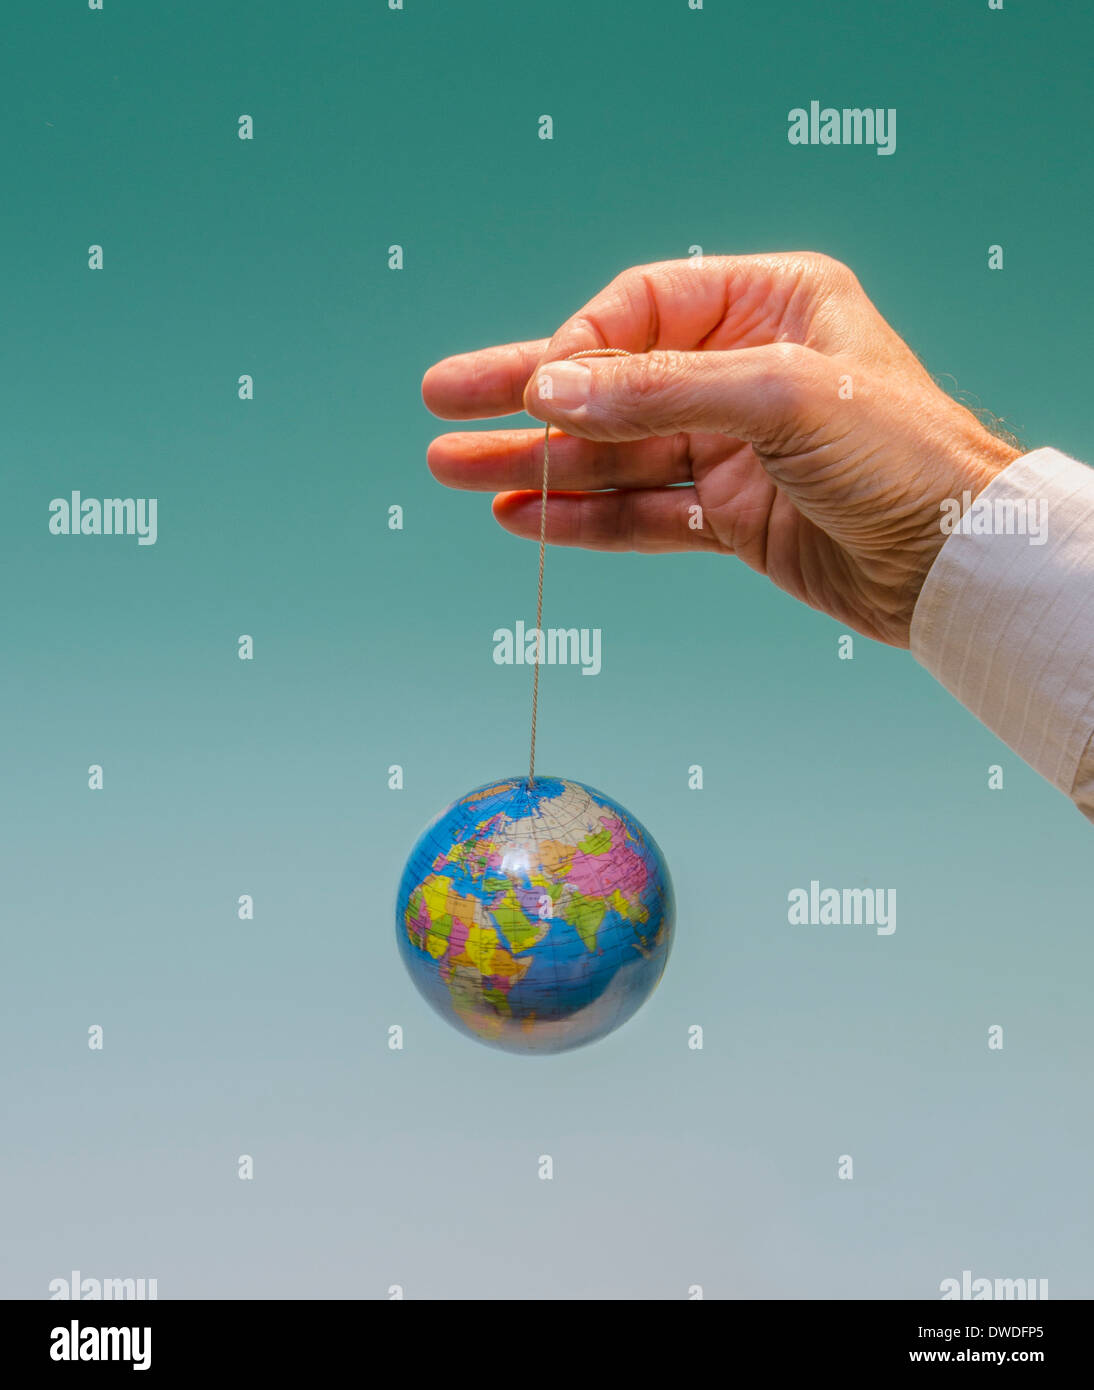 hand with dangling globe Africa, Europe, Asia, Russia prominent Stock Photo